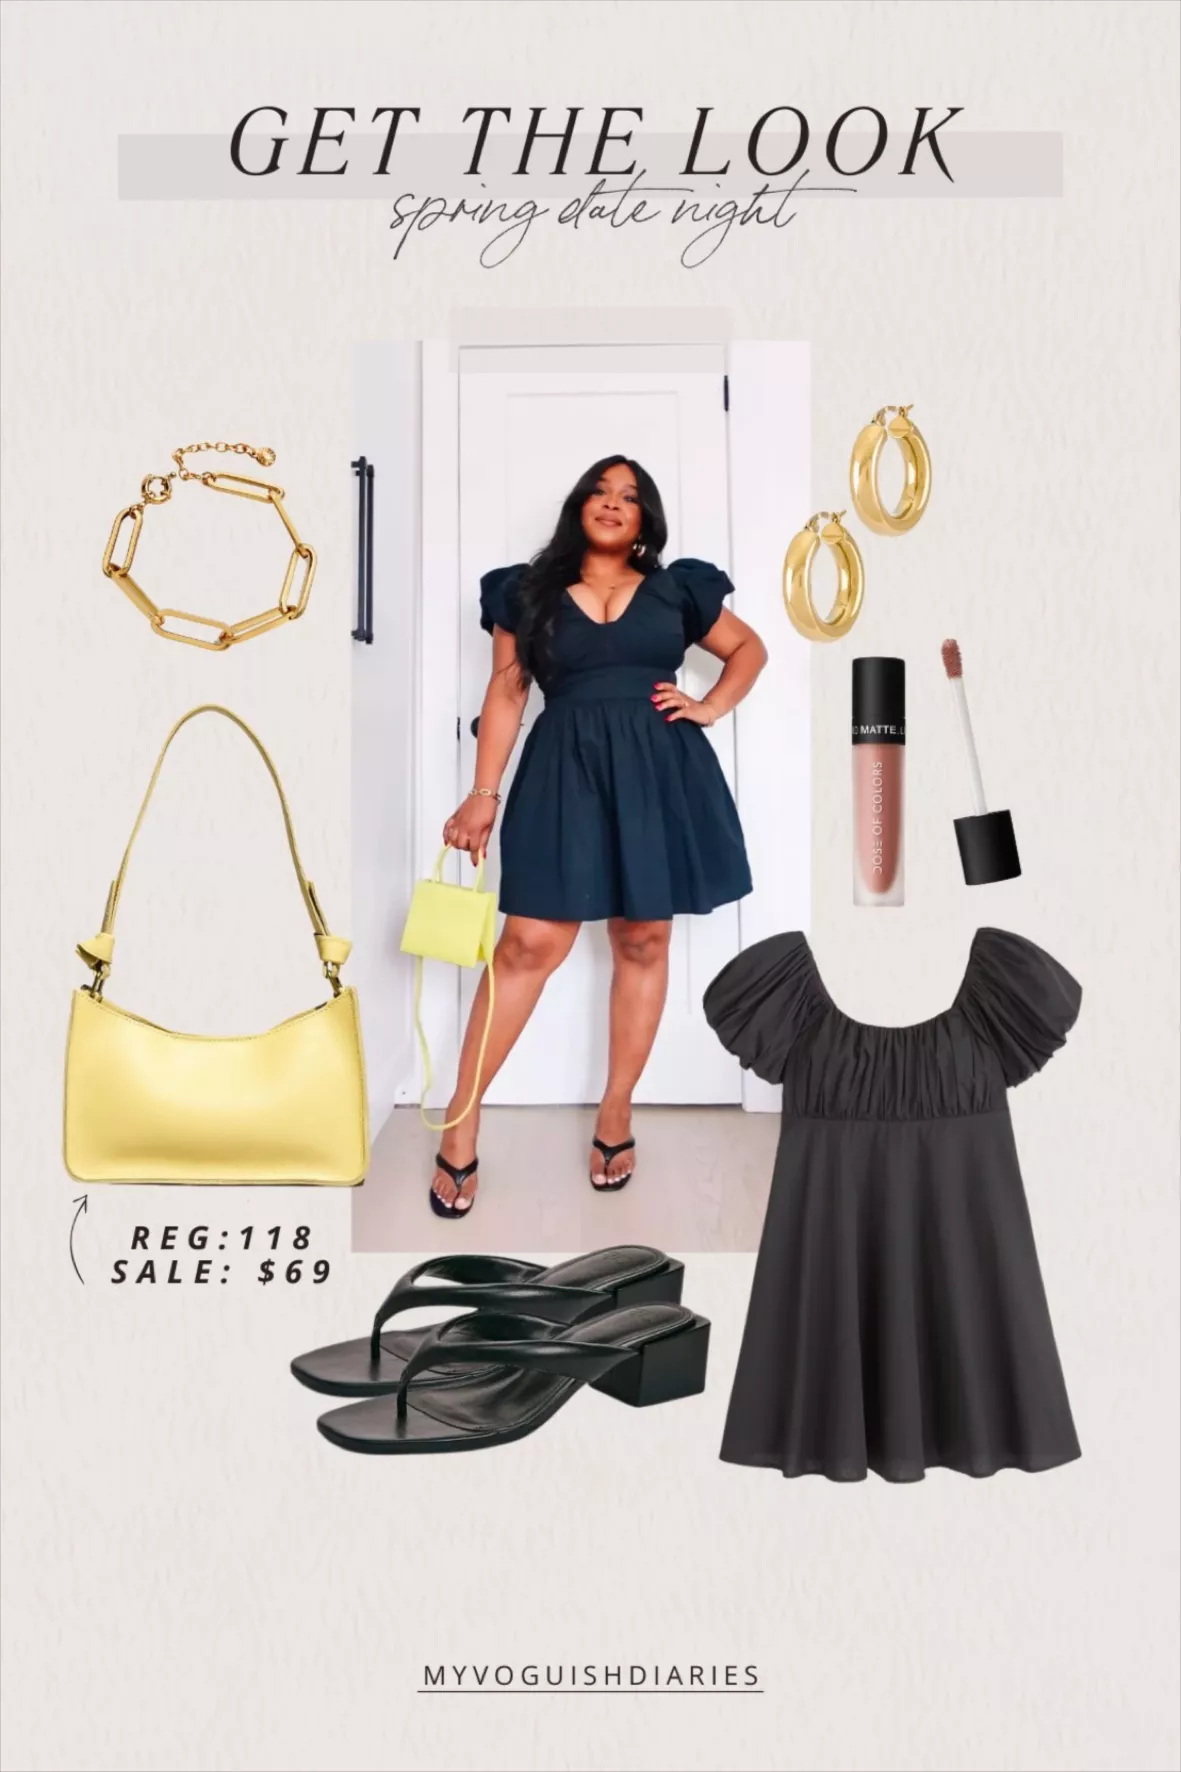 Puff sleeve black dress and sandals outfit